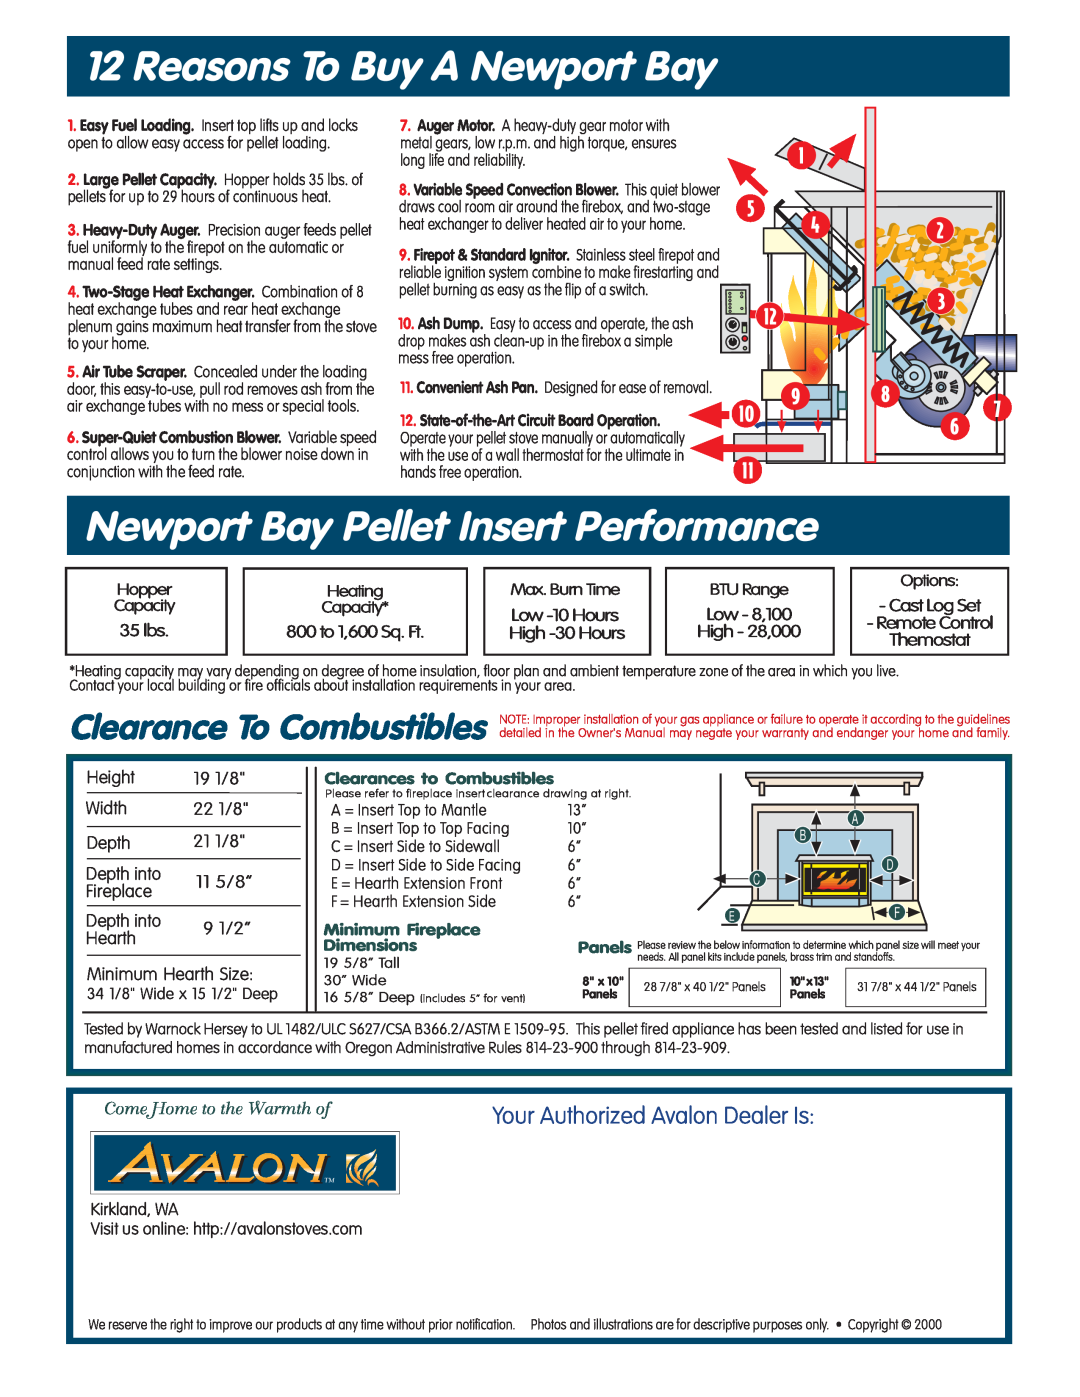 Avalon Stoves manual Reasons To Buy A Newport Bay, Newport Bay Pellet Insert Performance, Clearance To Combustibles 